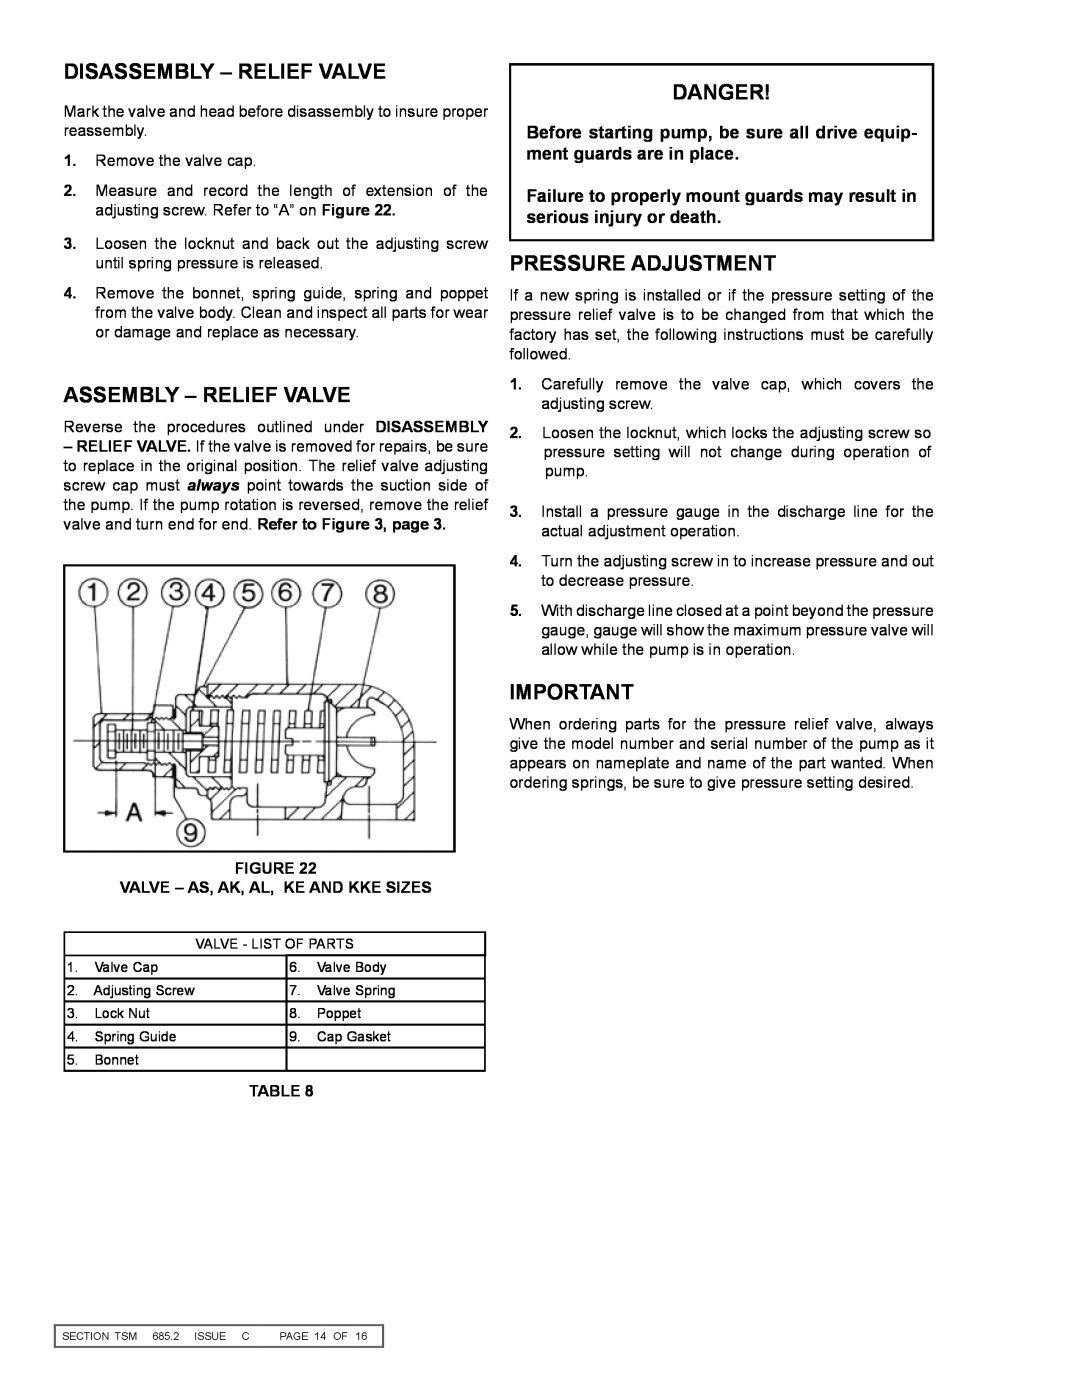 Viking 855 service manual Disassembly - Relief Valve, Assembly - Relief Valve, Pressure Adjustment, Danger 